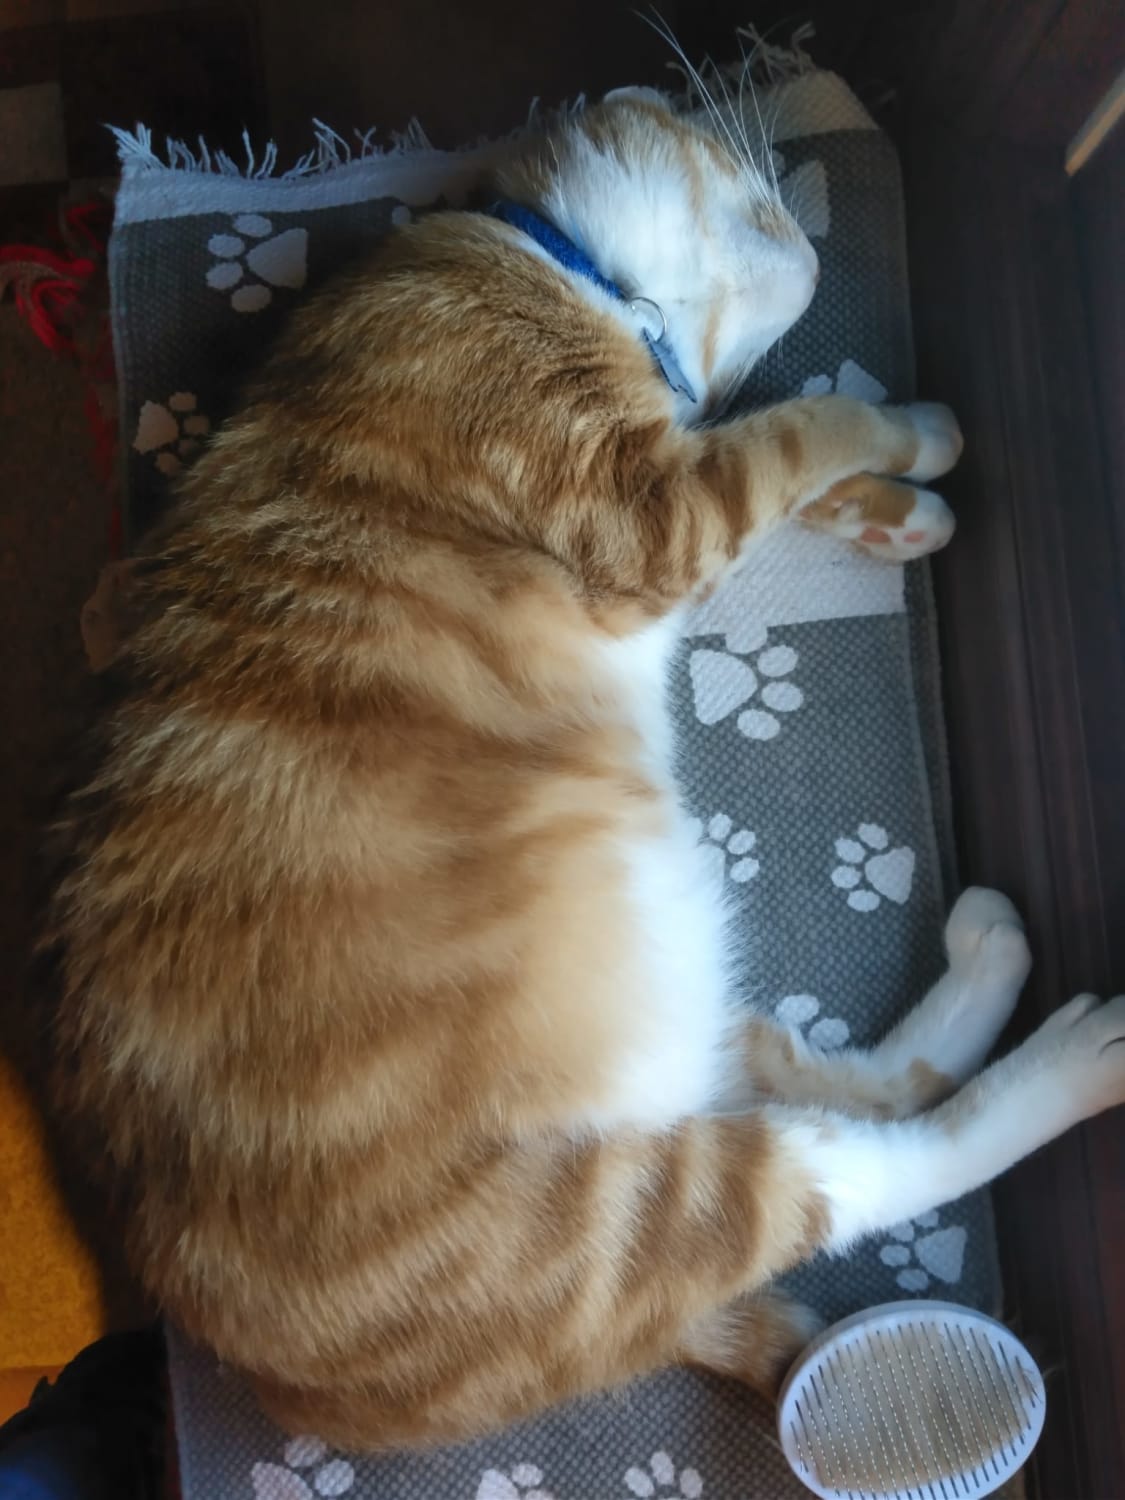 My adopted 2 year old chonker on his journey to lose 2-3 pounds